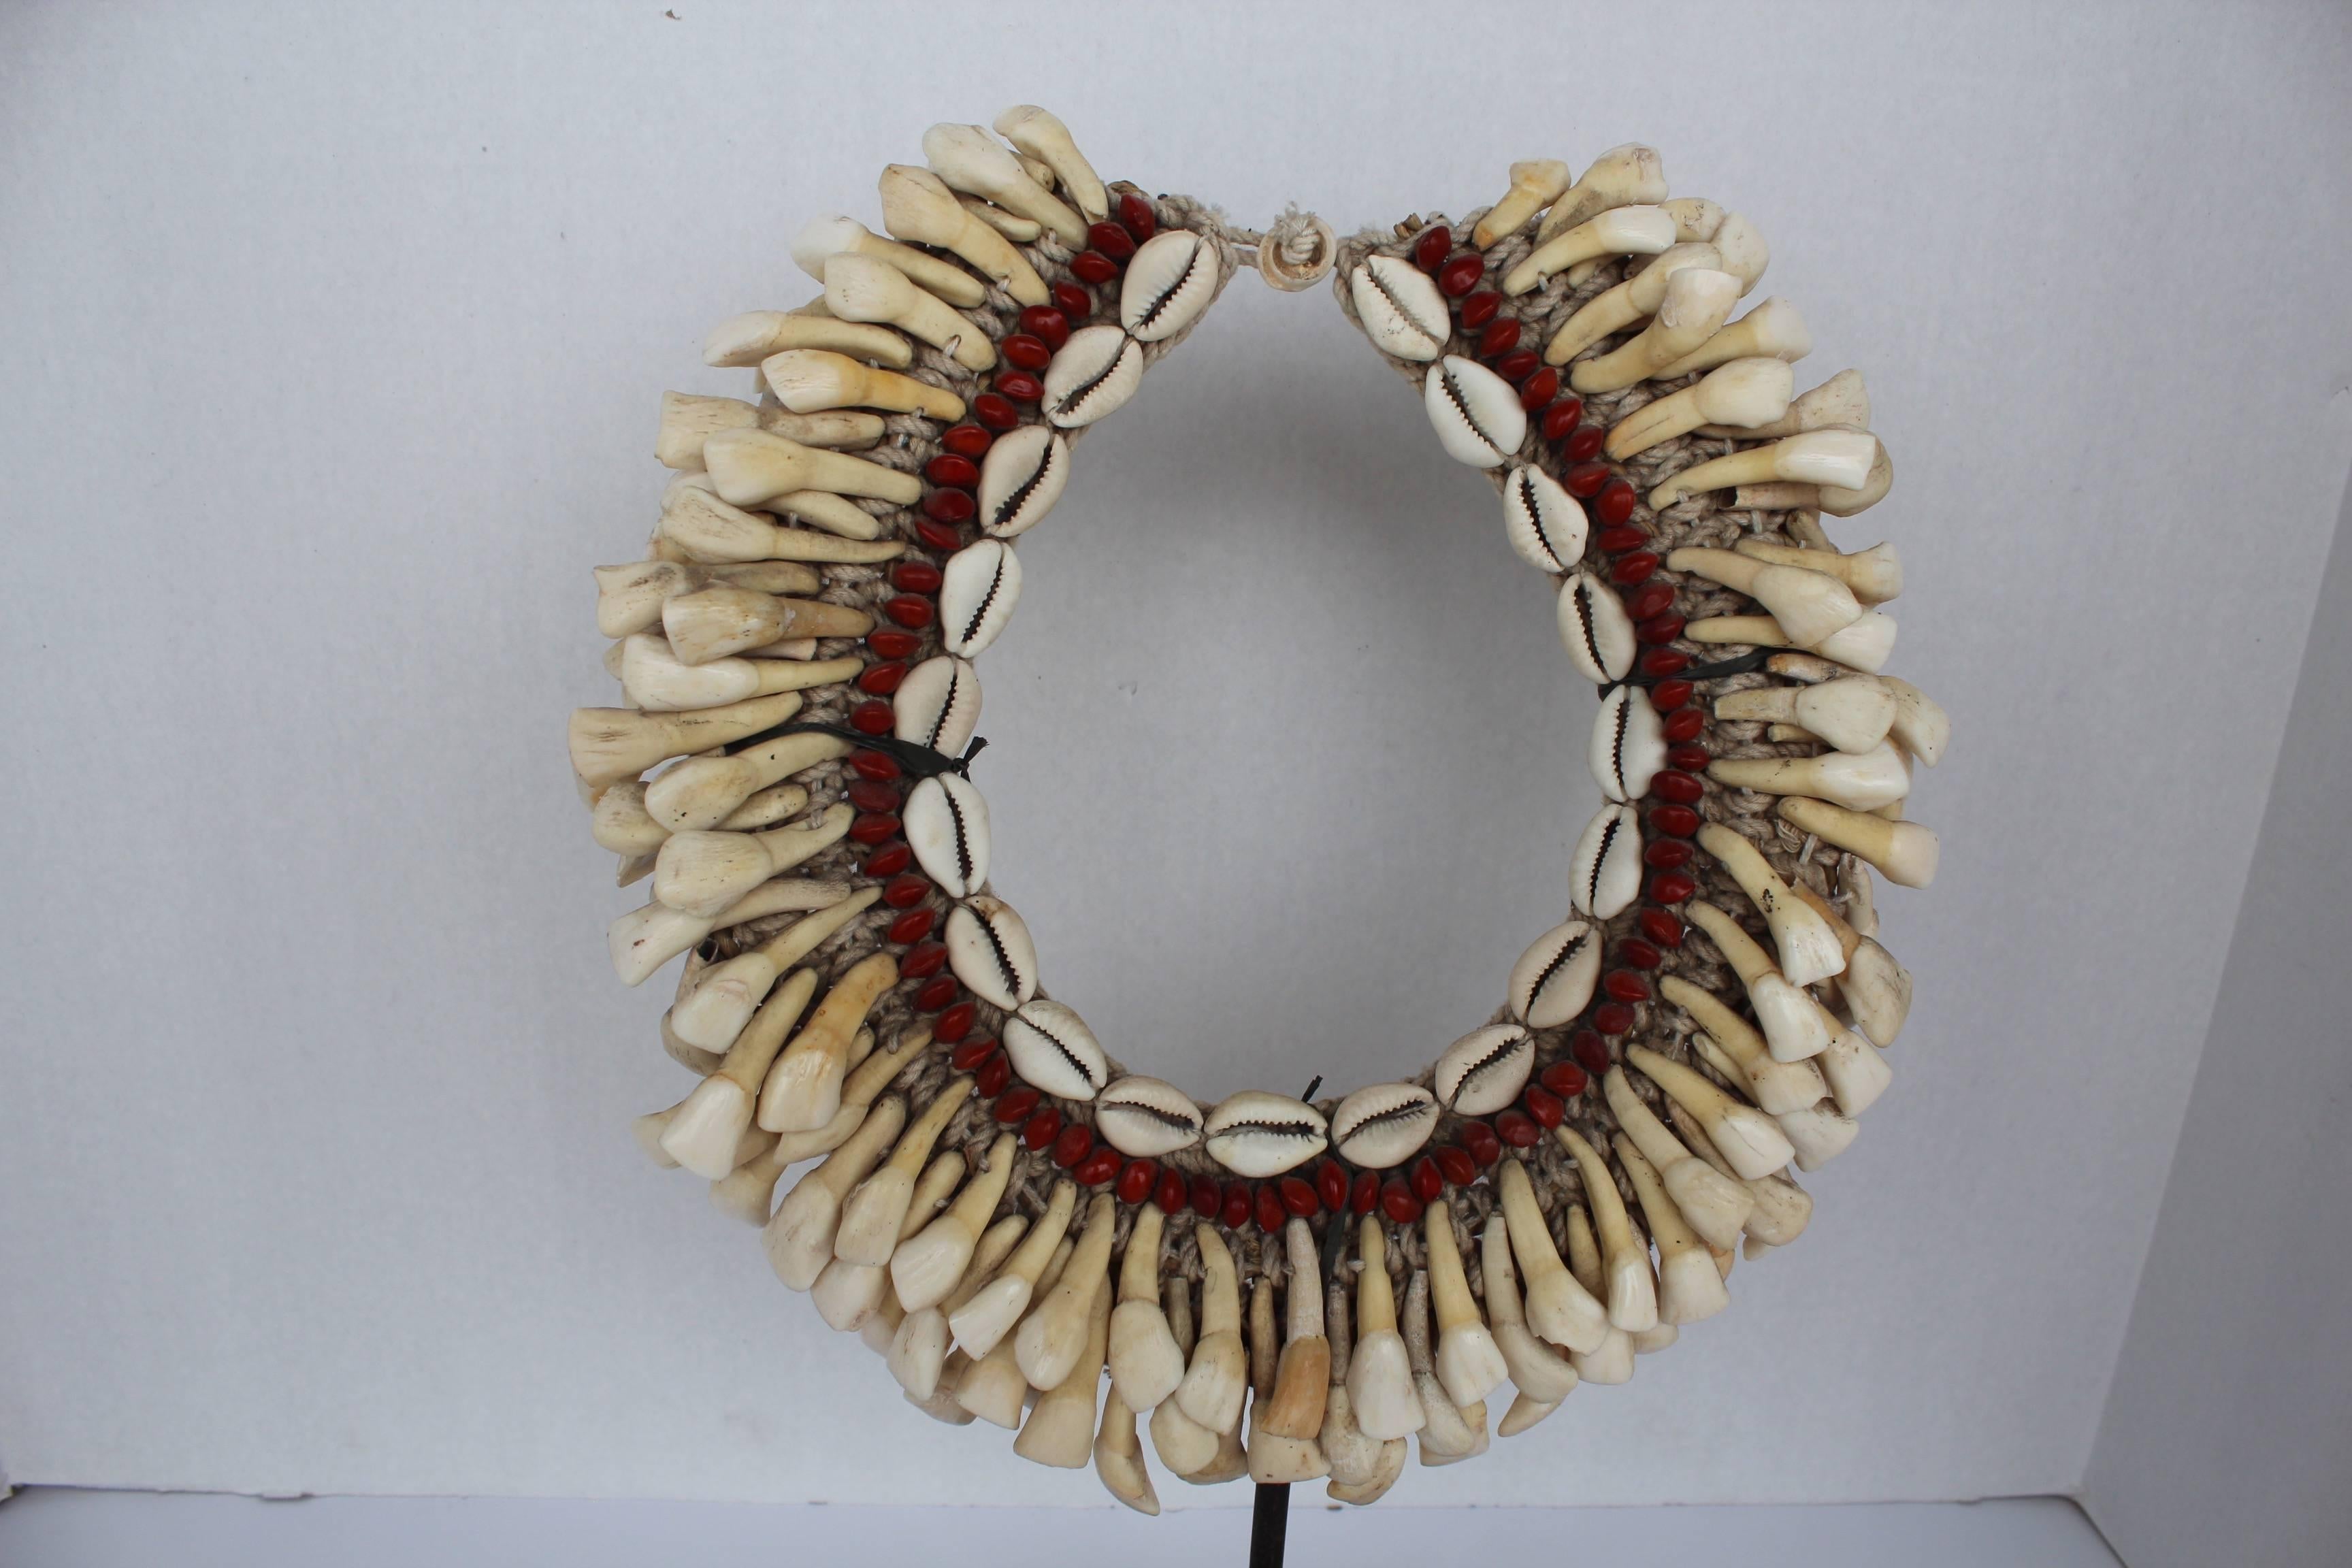 Papua New Guinean Tribal Teeth Necklaces on Stand